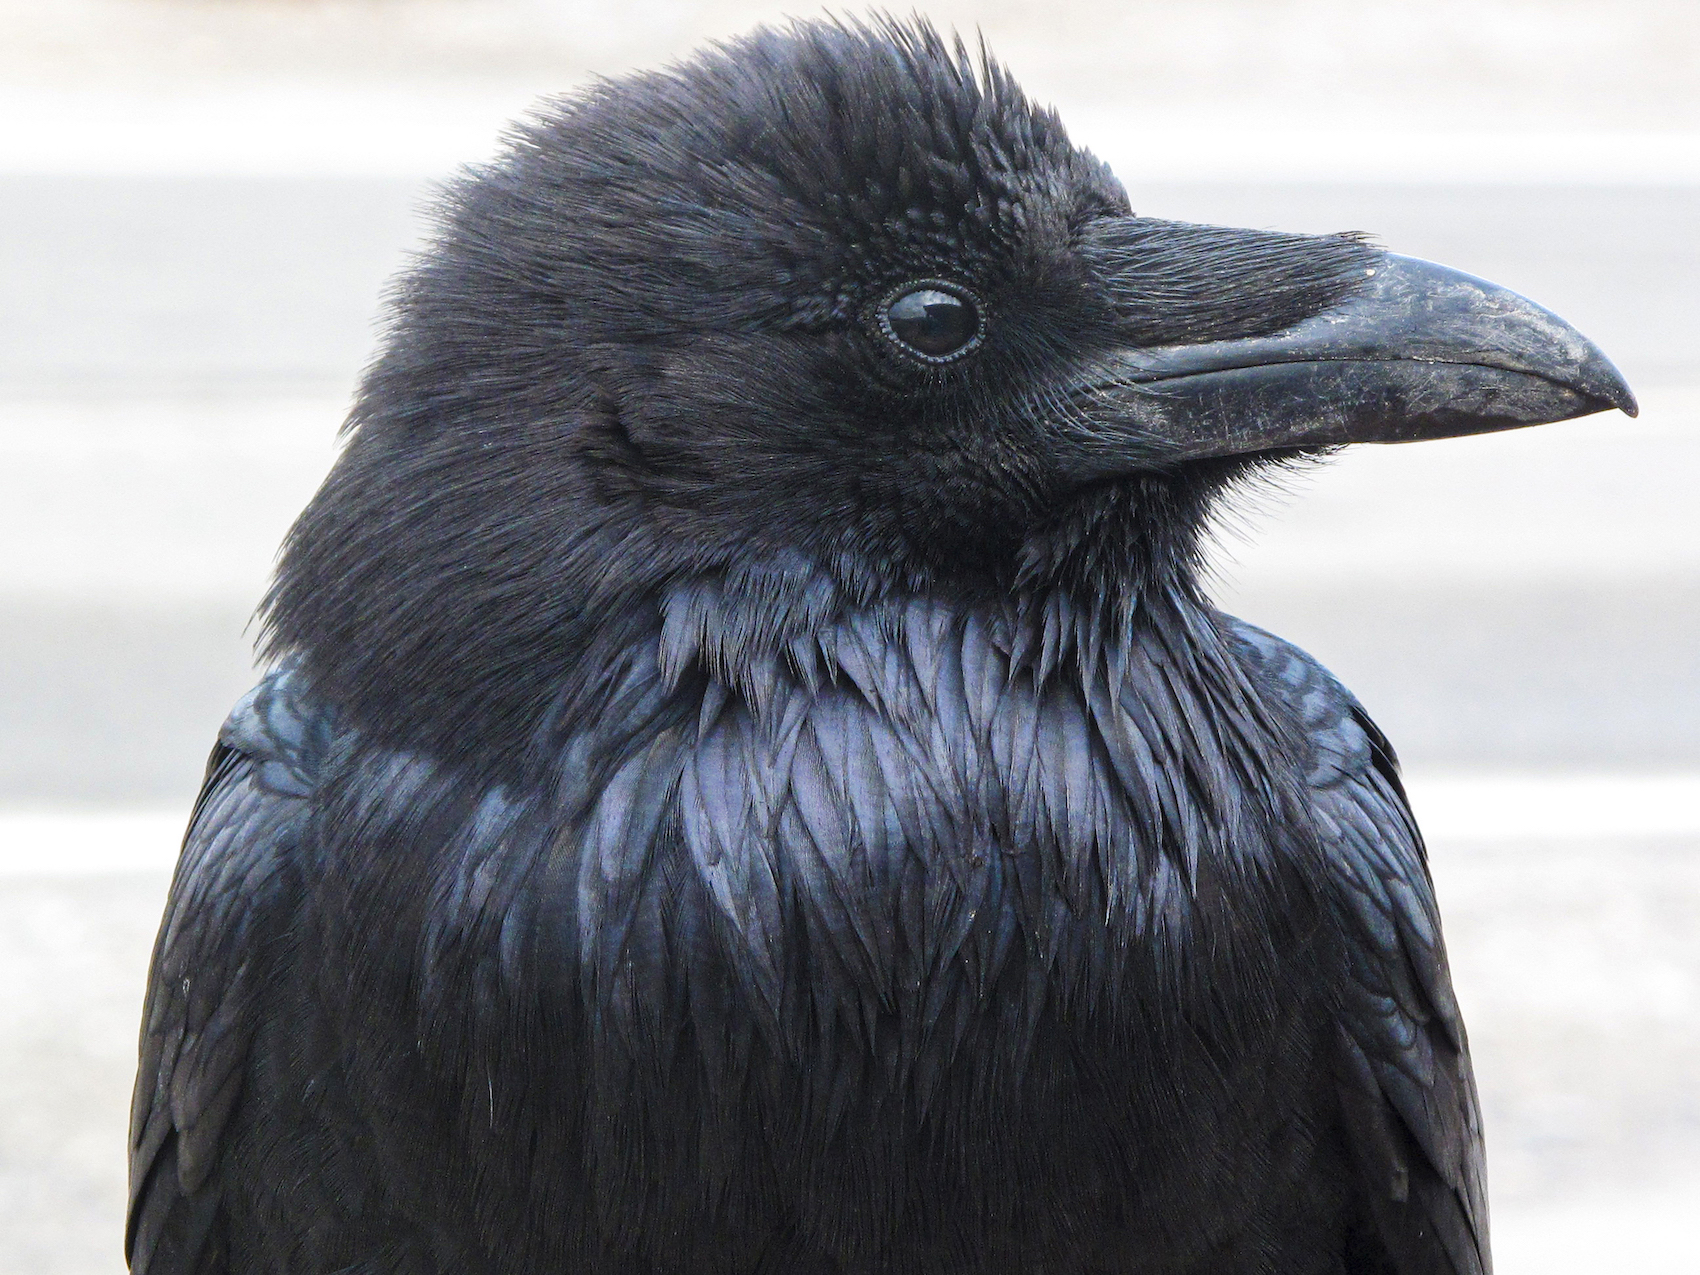 A close-up photo of a raven reveals scrape marks on its beak and iridescence on its upper-chest feathers.